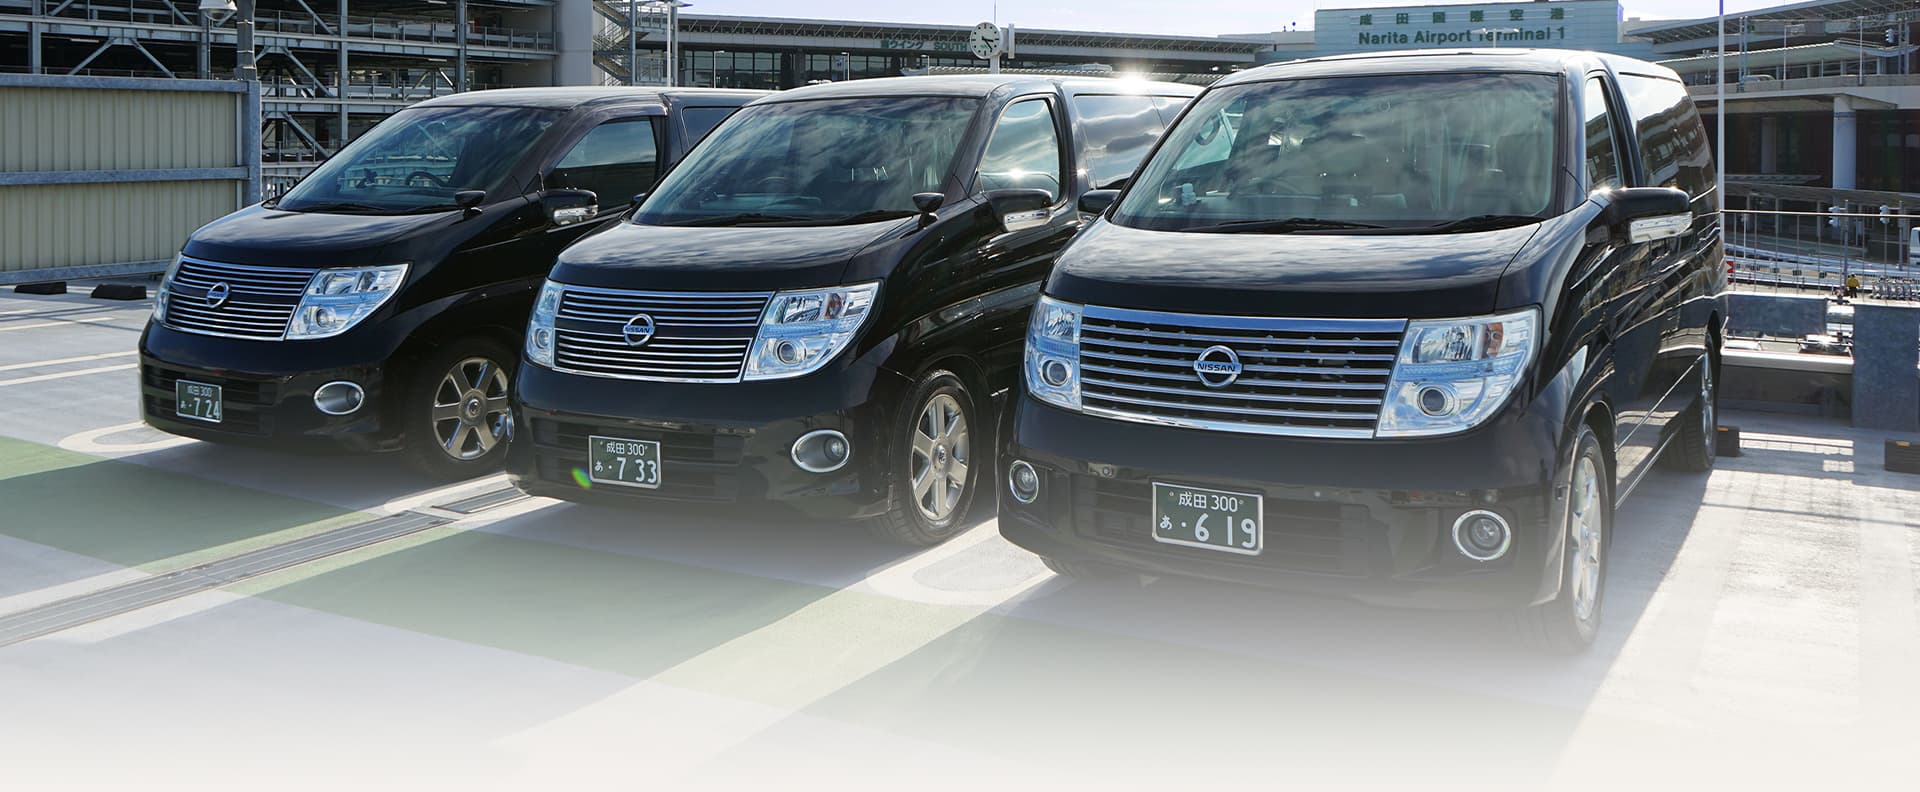 Taxi cars that meet the standards of Japan's Ministry of Health, Labor and Welfare